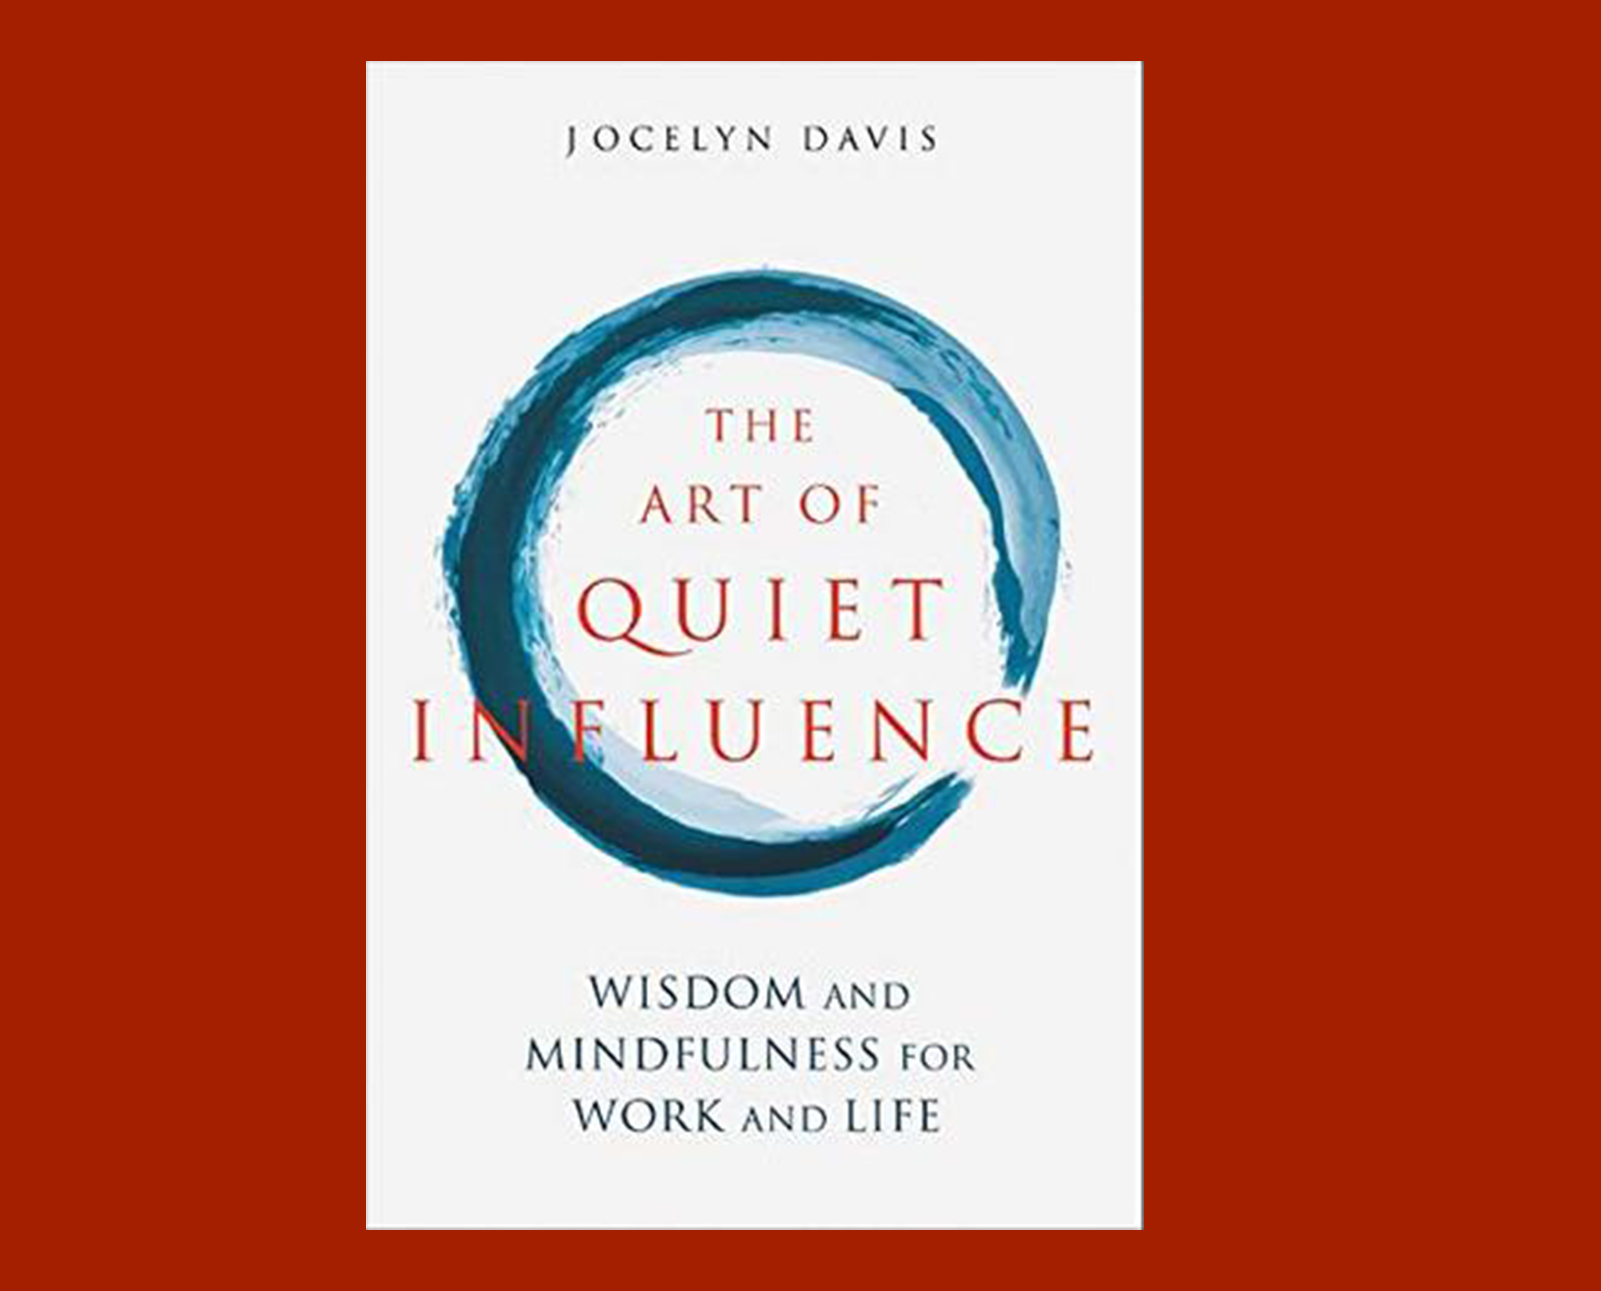 The Art of Quiet Influence: Wisdom and Mindfulness for Work and Life